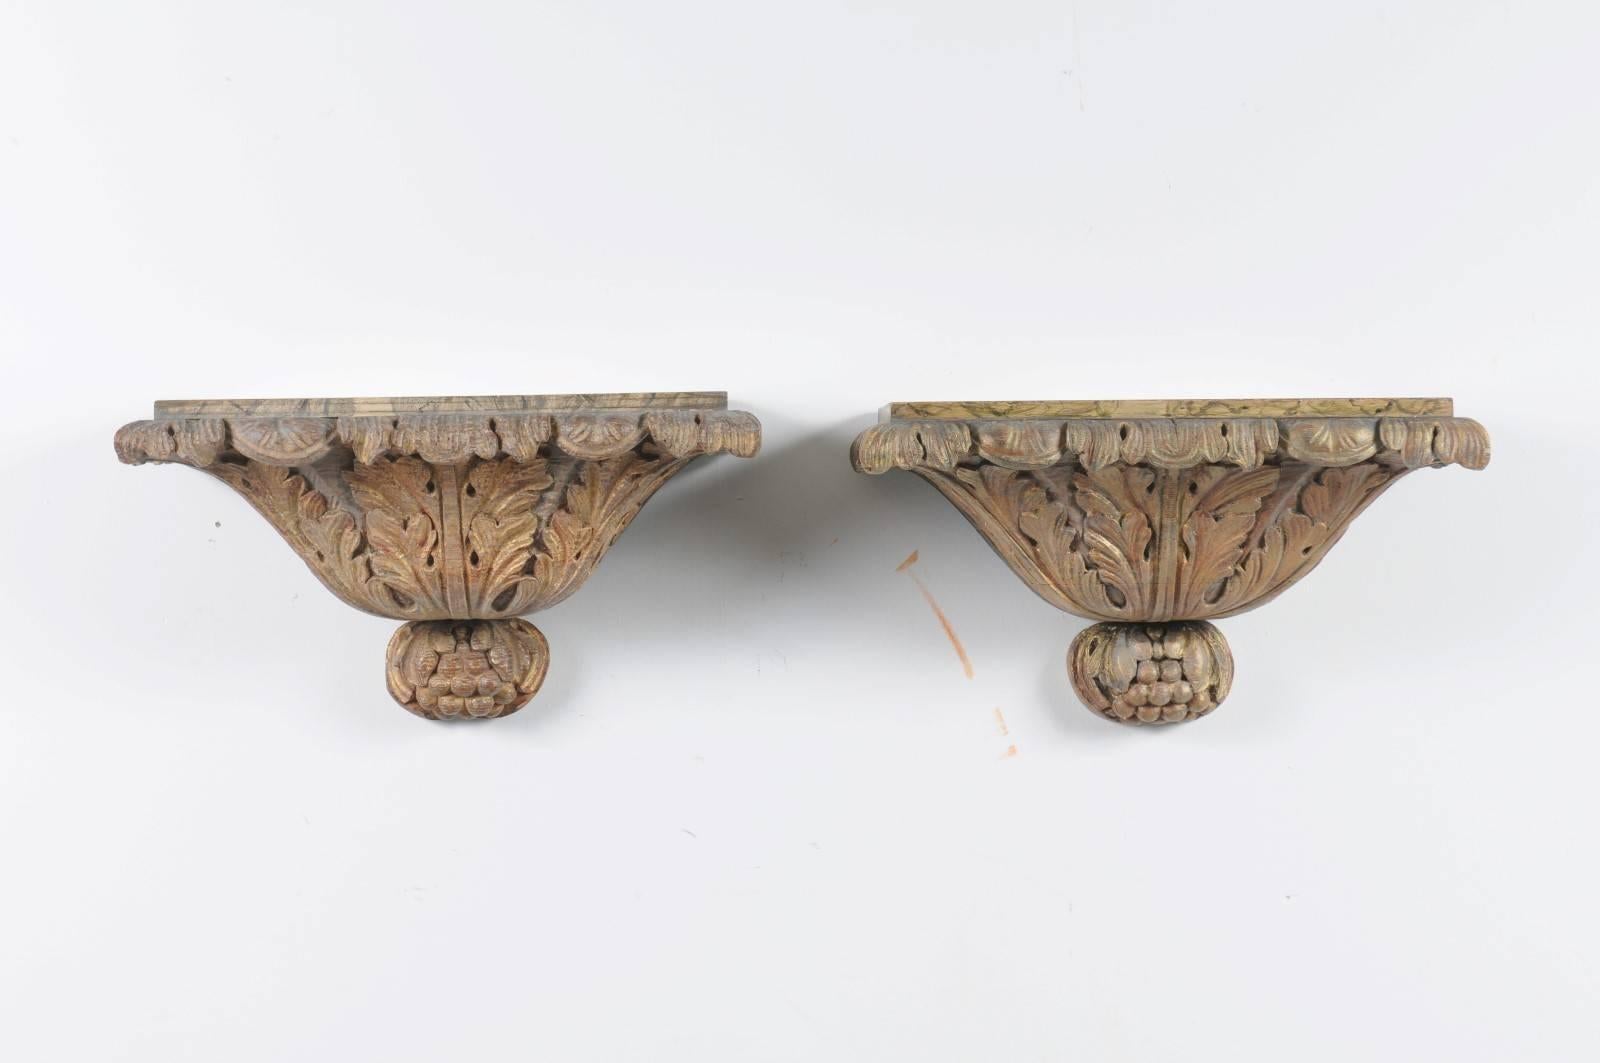 A pair of Italian richly carved giltwood wall brackets rom the second half of the 19th century with faux-marble painted tops. Each of this pair of Italian wall brackets features an exquisite carved body, skillfully decorated with gilded acanthus